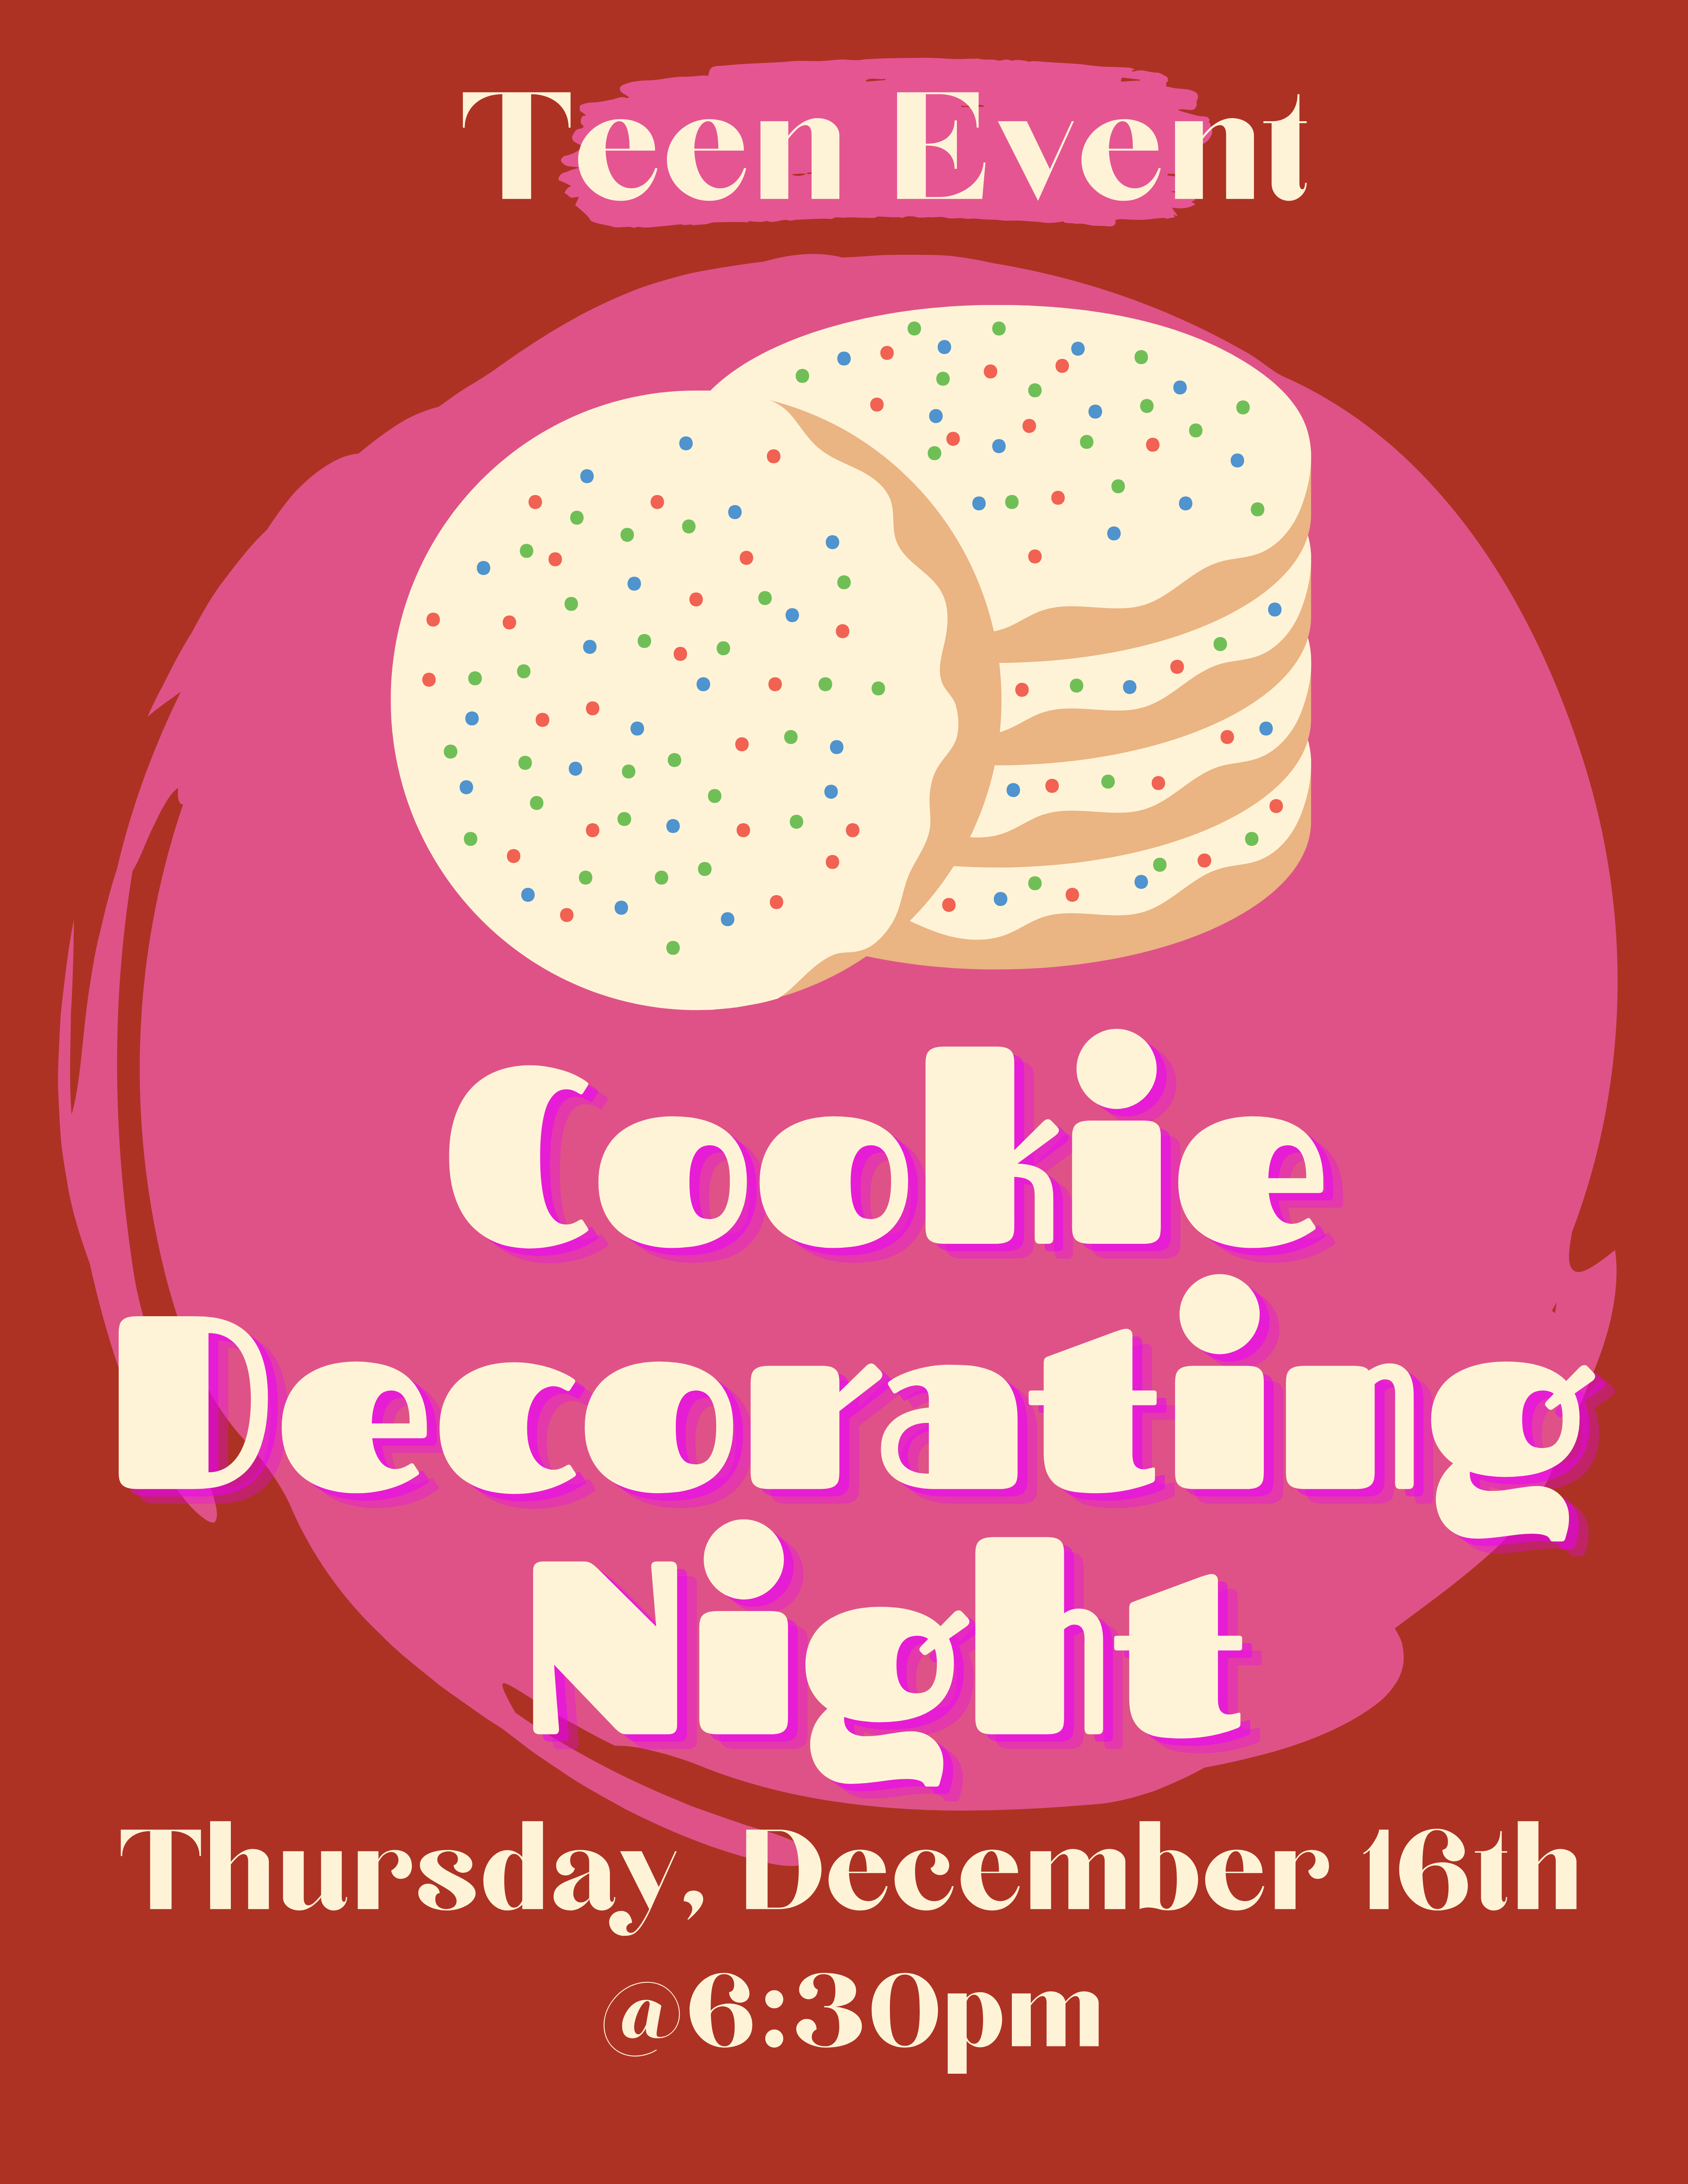 Red background with a pink circle, on top of that circle are cookies with icing and sprinkles. The text reads "Teen Event: Cookie Decorating Night. Thursday, December 16th at 6:30pm."